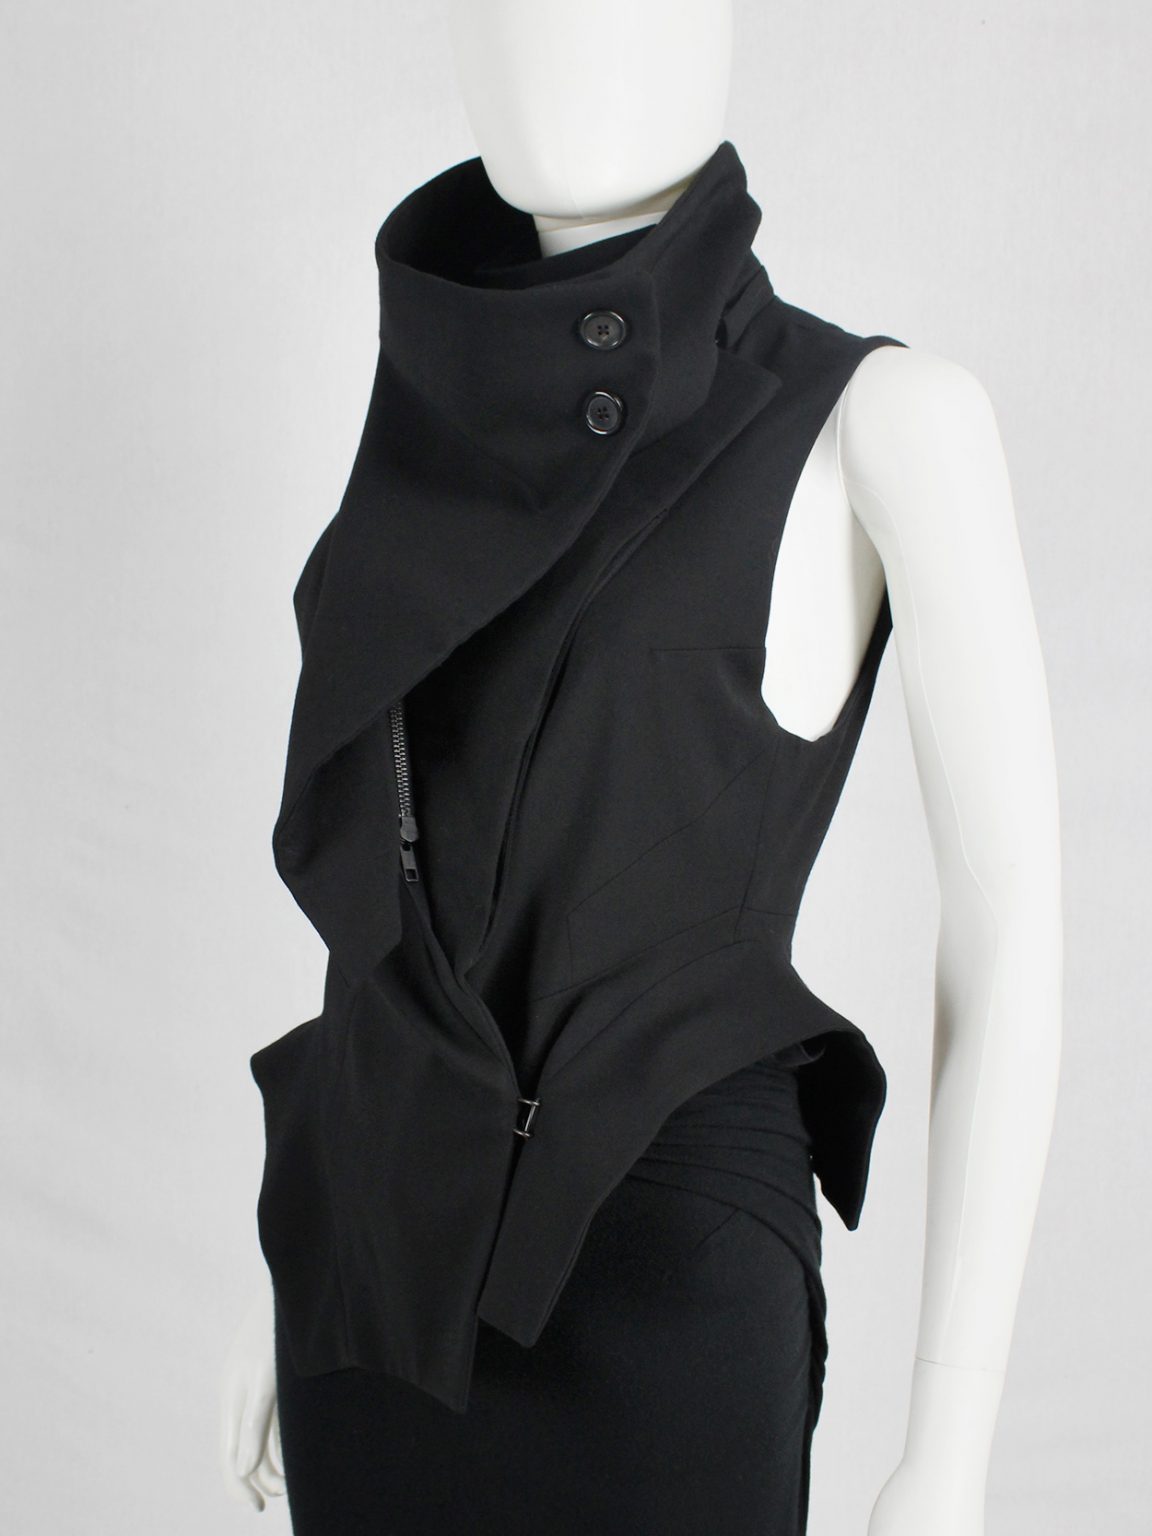 Ann Demeulemeester black draped vest with standing collar and zipper panels — fall 2012